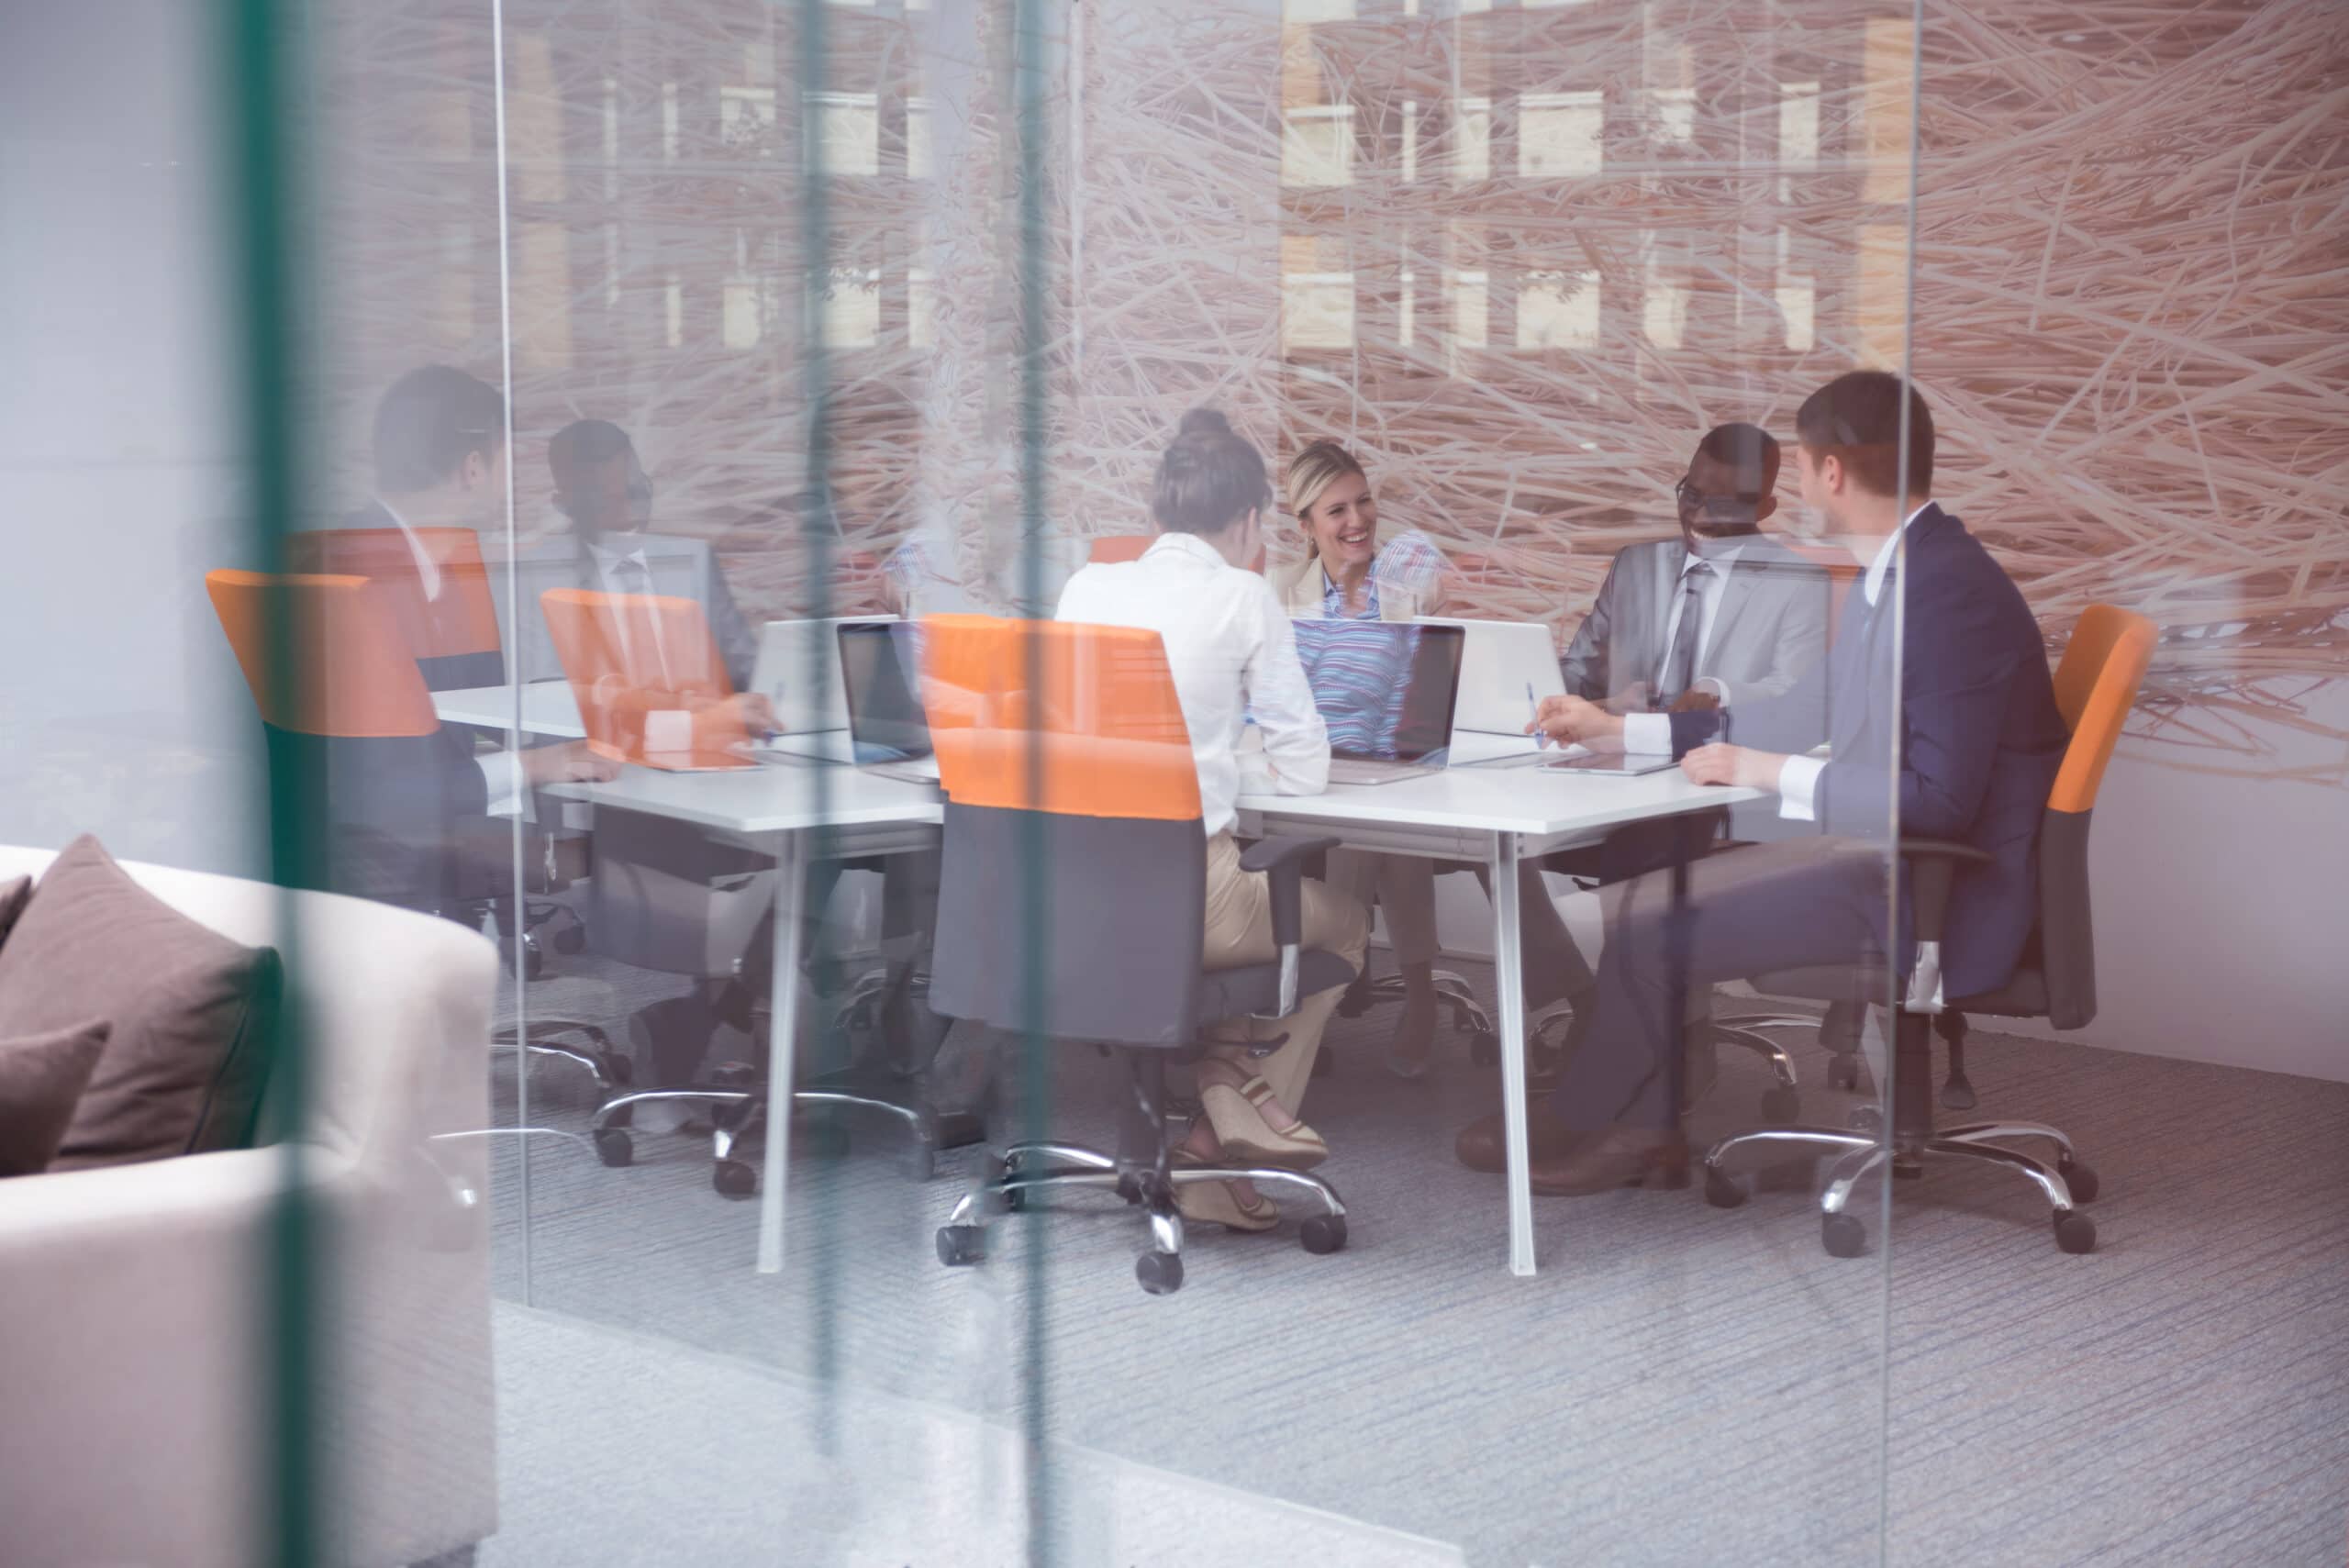 A team of professionals engaged in a meeting behind a glass wall in a modern office setting.